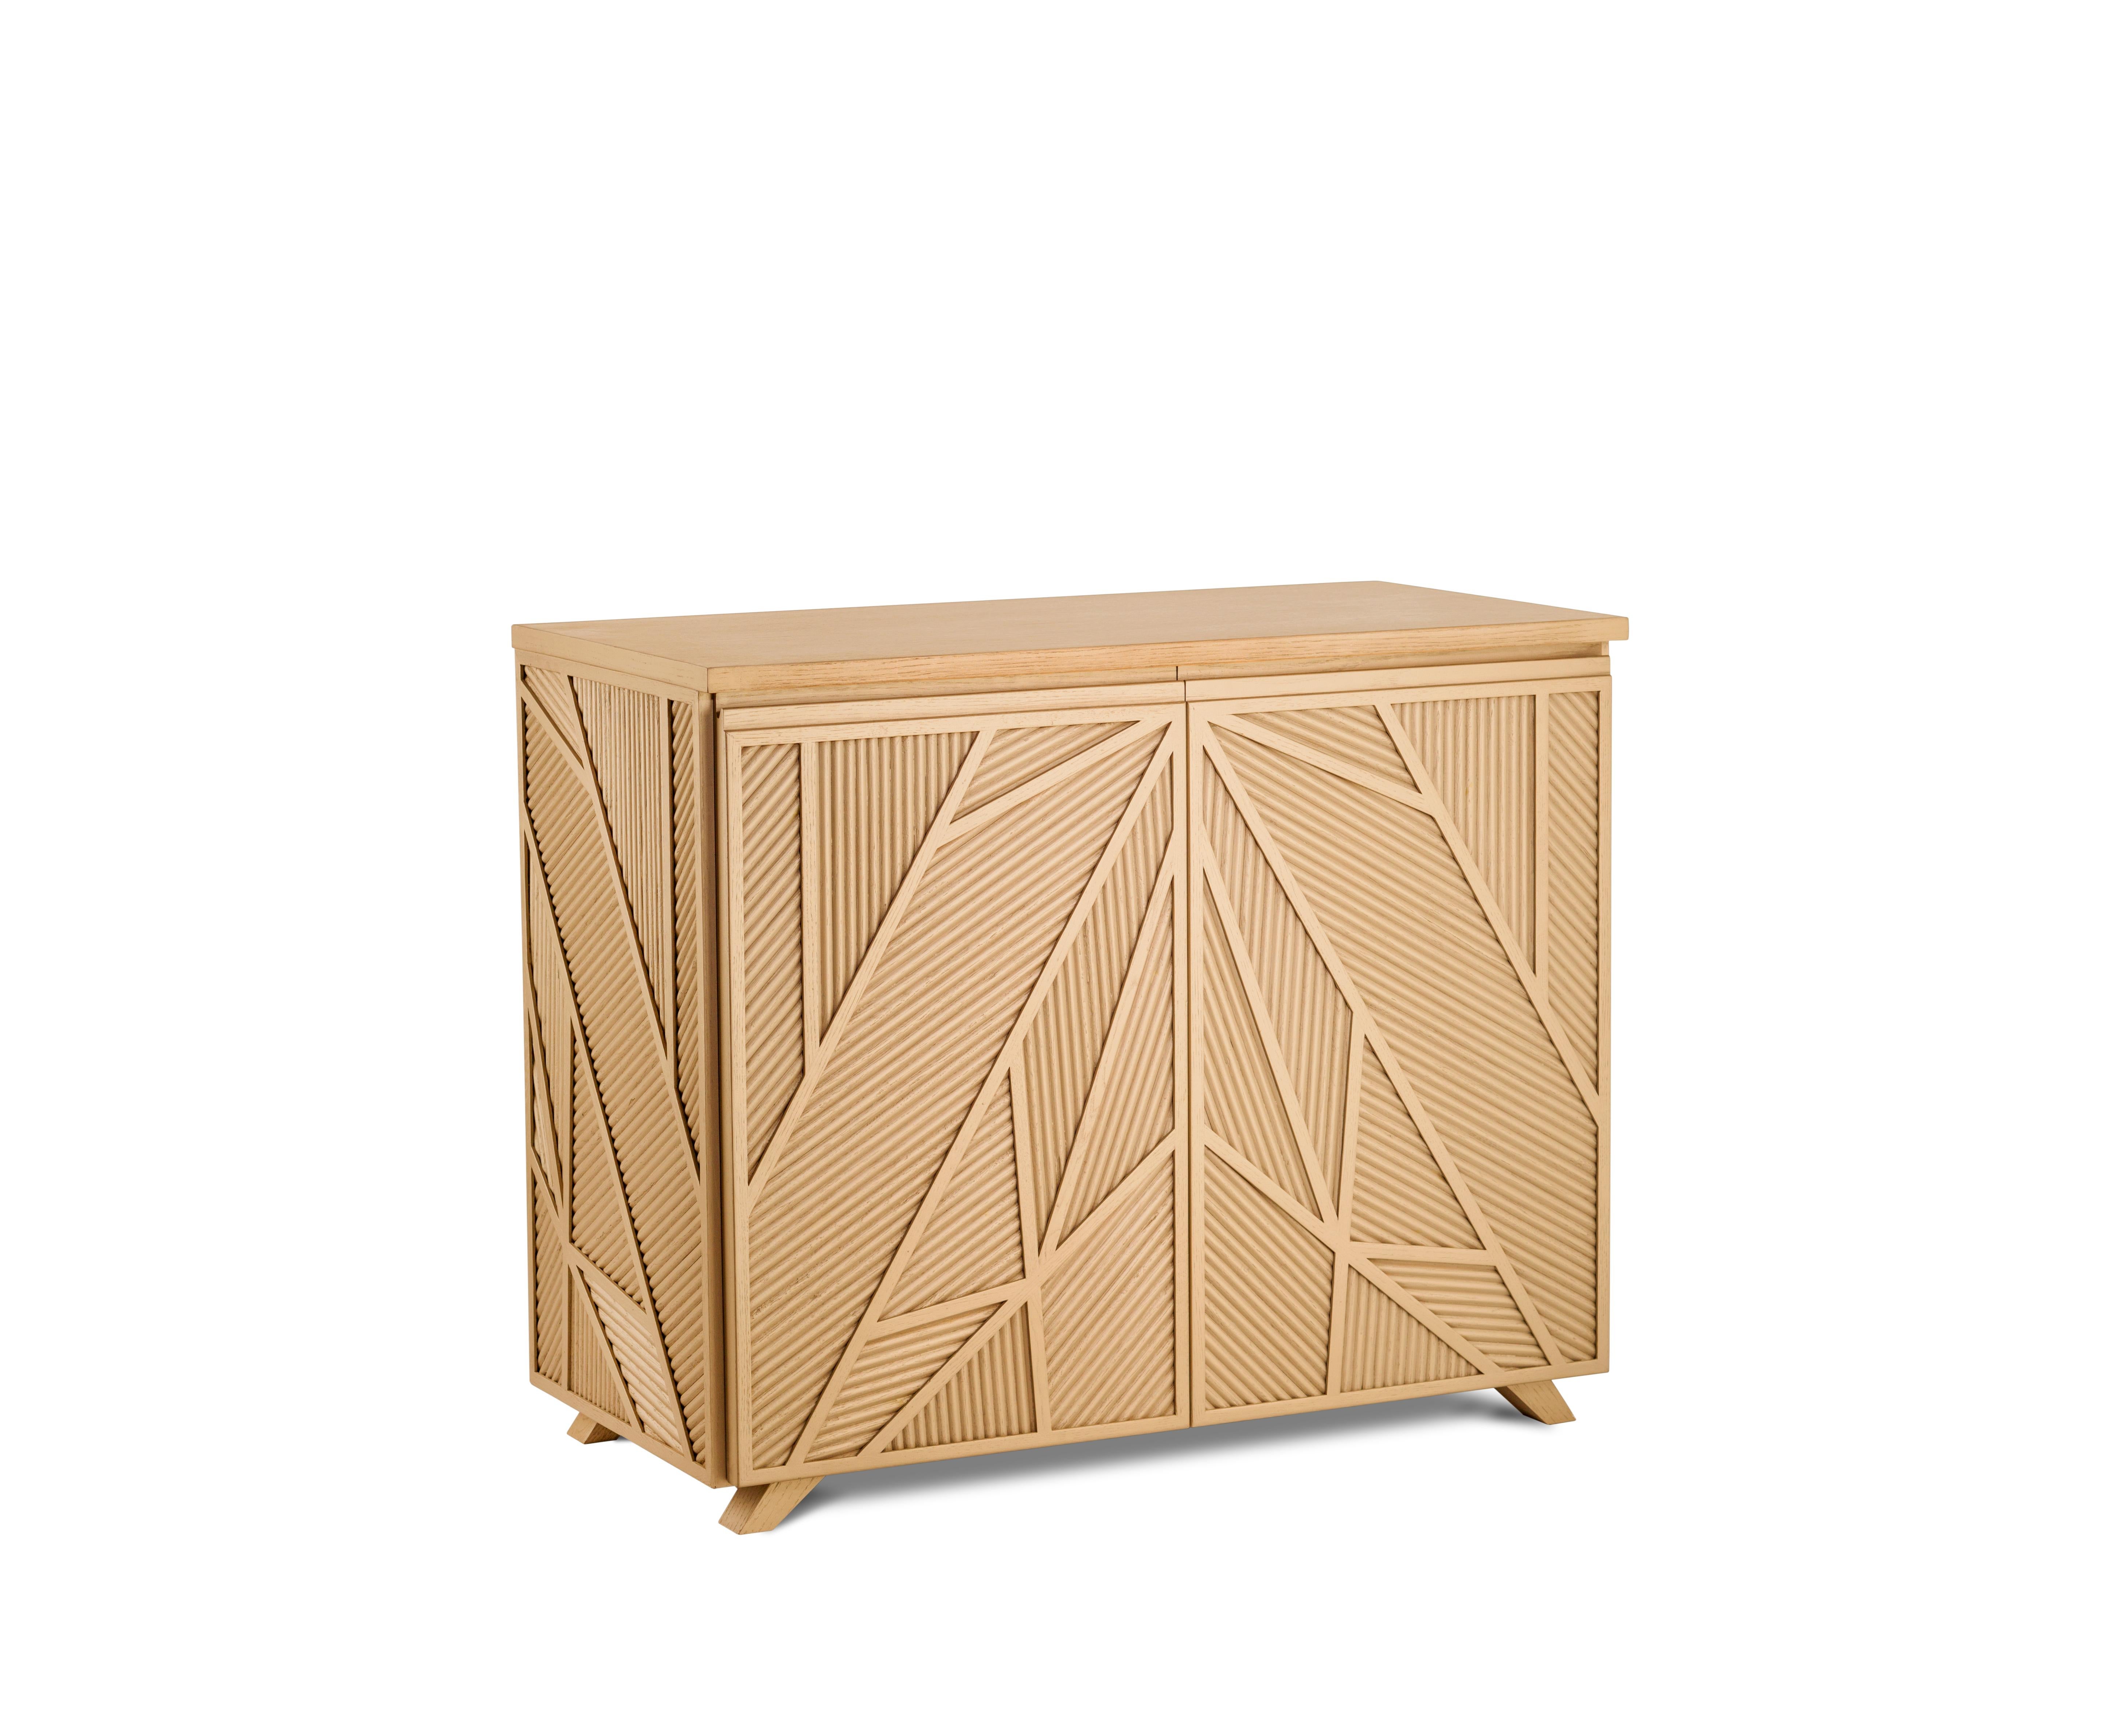 Egyptian Geometric Oak Sticks Cabinet Inspired from Ancient Egypt Use of Palm Branches